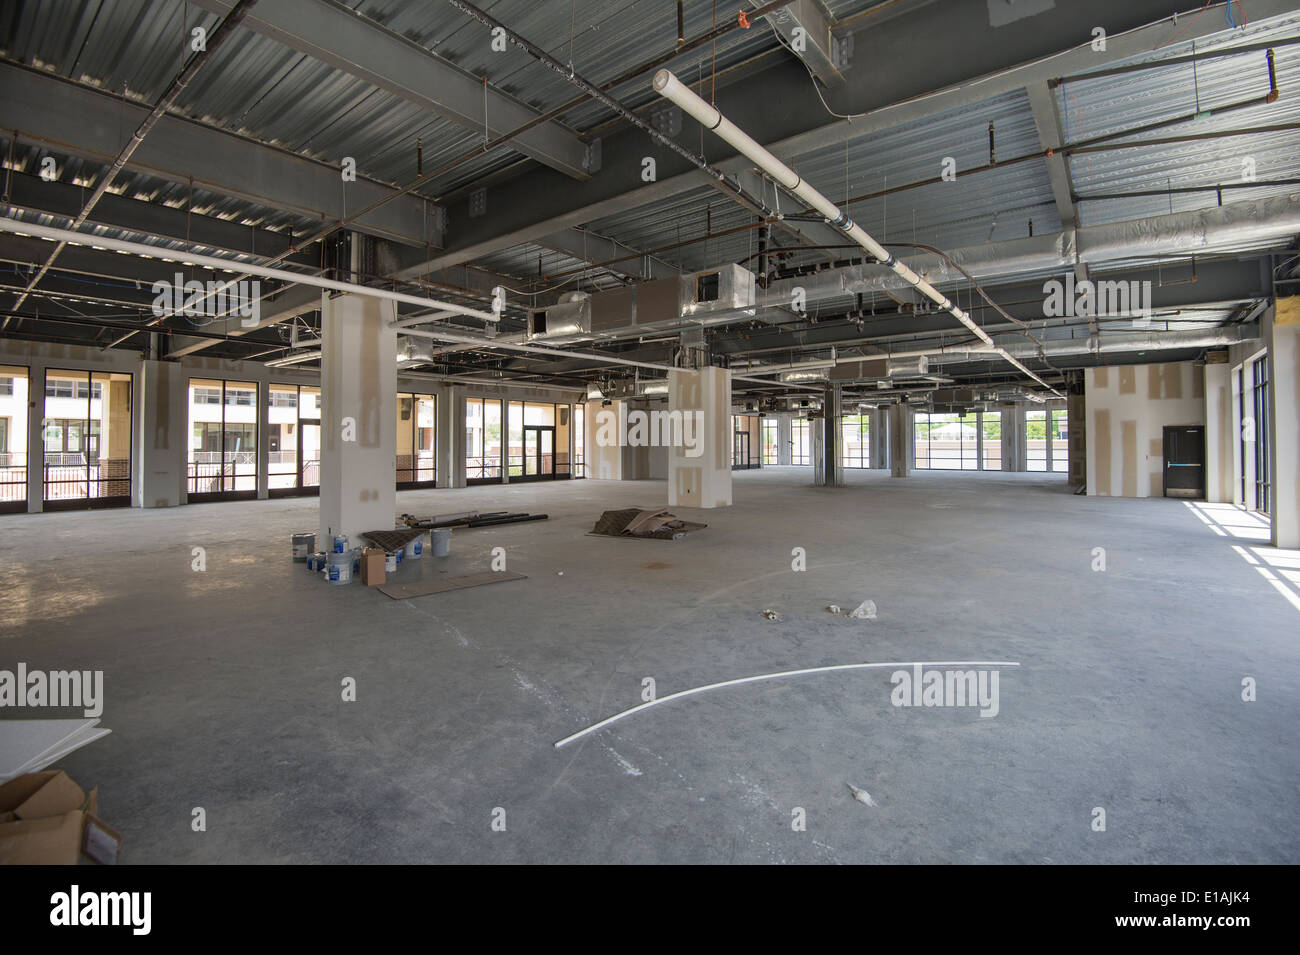 New Construction, Commercial Real Estate Interior Stock Photo